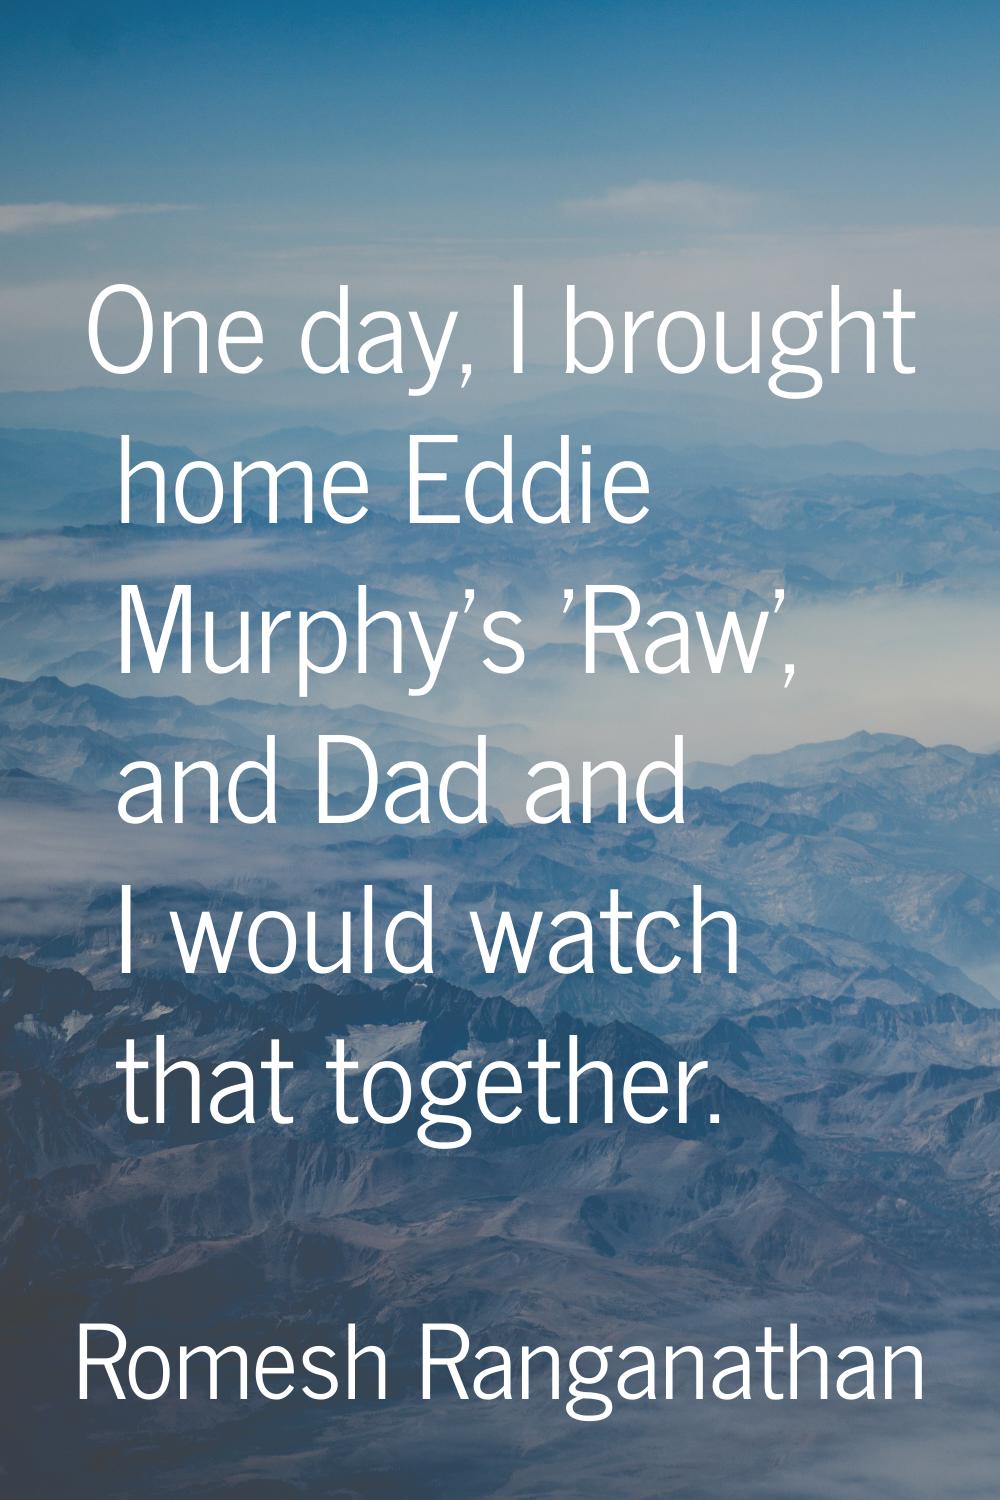 One day, I brought home Eddie Murphy's 'Raw', and Dad and I would watch that together.